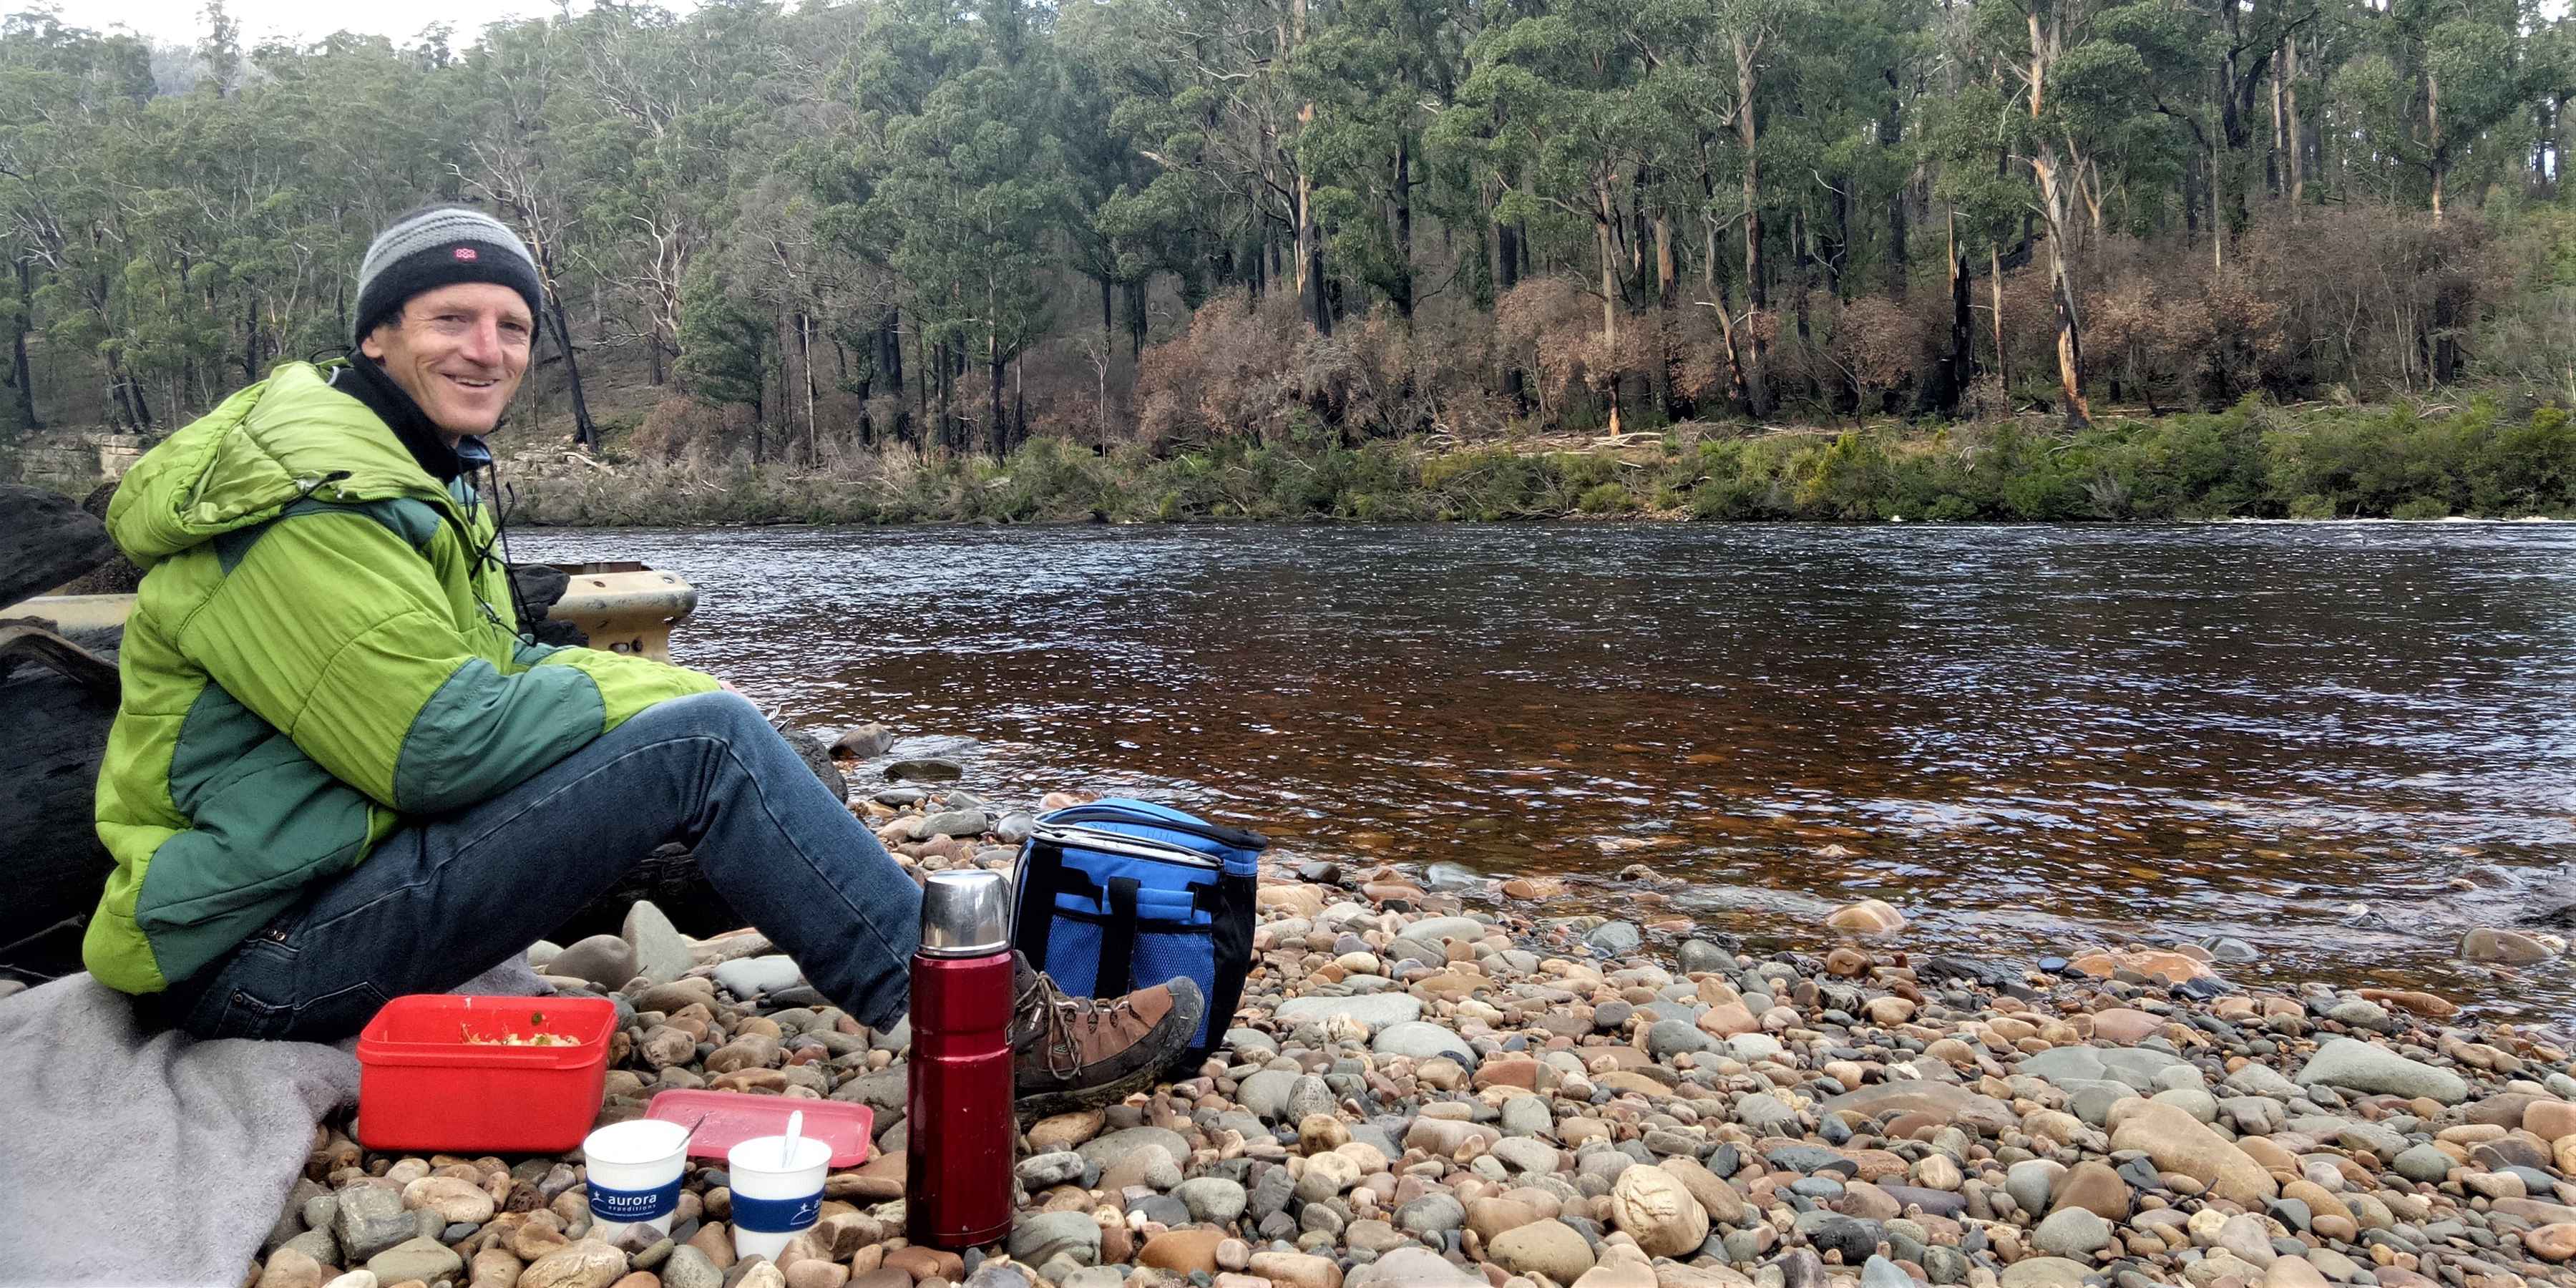 A warmly-dressed man sitting on stream-rounded pebbles at the edge of a broad river smiles at us. He has a thermos, two cups and other picnic material beside him.